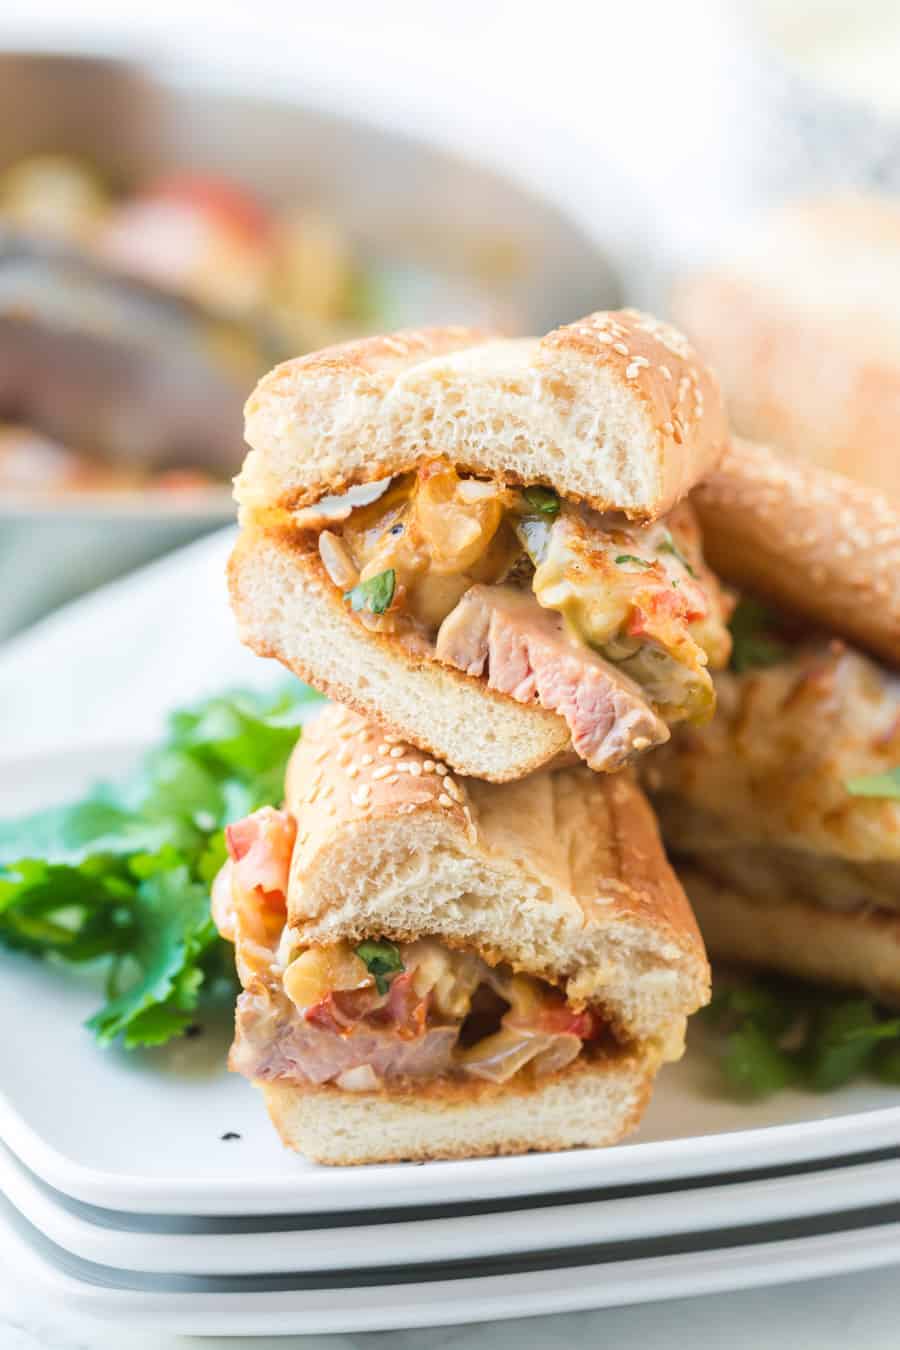 Cheese steak sandwiches are a deliciously rich and cheesy classic sammie that'll warm you up from the inside out and satisfy all your comfort food cravings! #cheesesteak #cheesesteaksandwich #phillycheesesteak #comfortfood